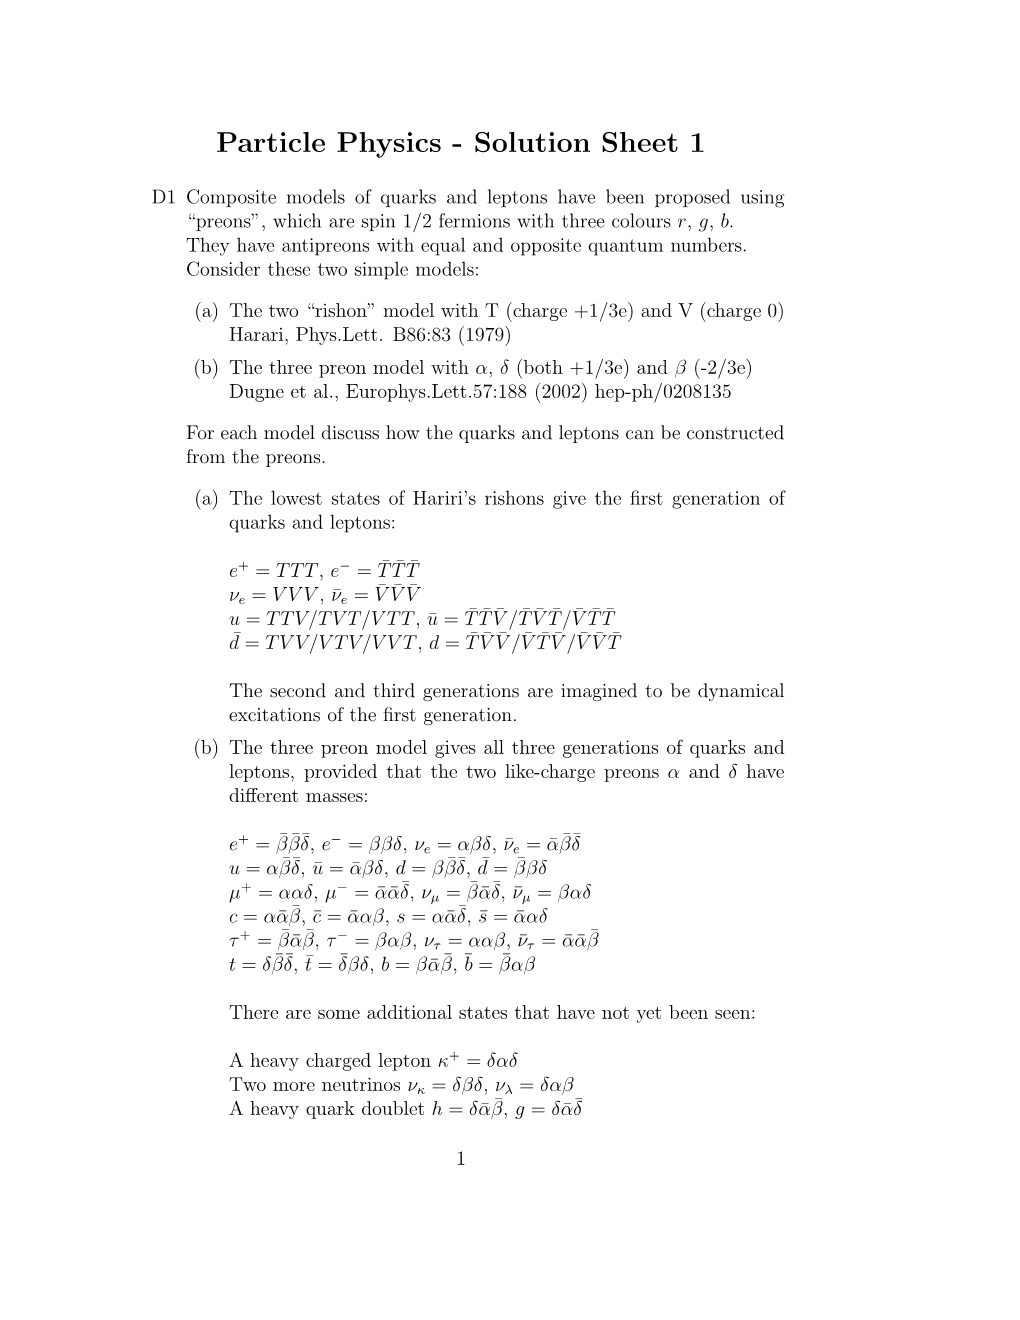 Particle Physics - Solution Sheet 1